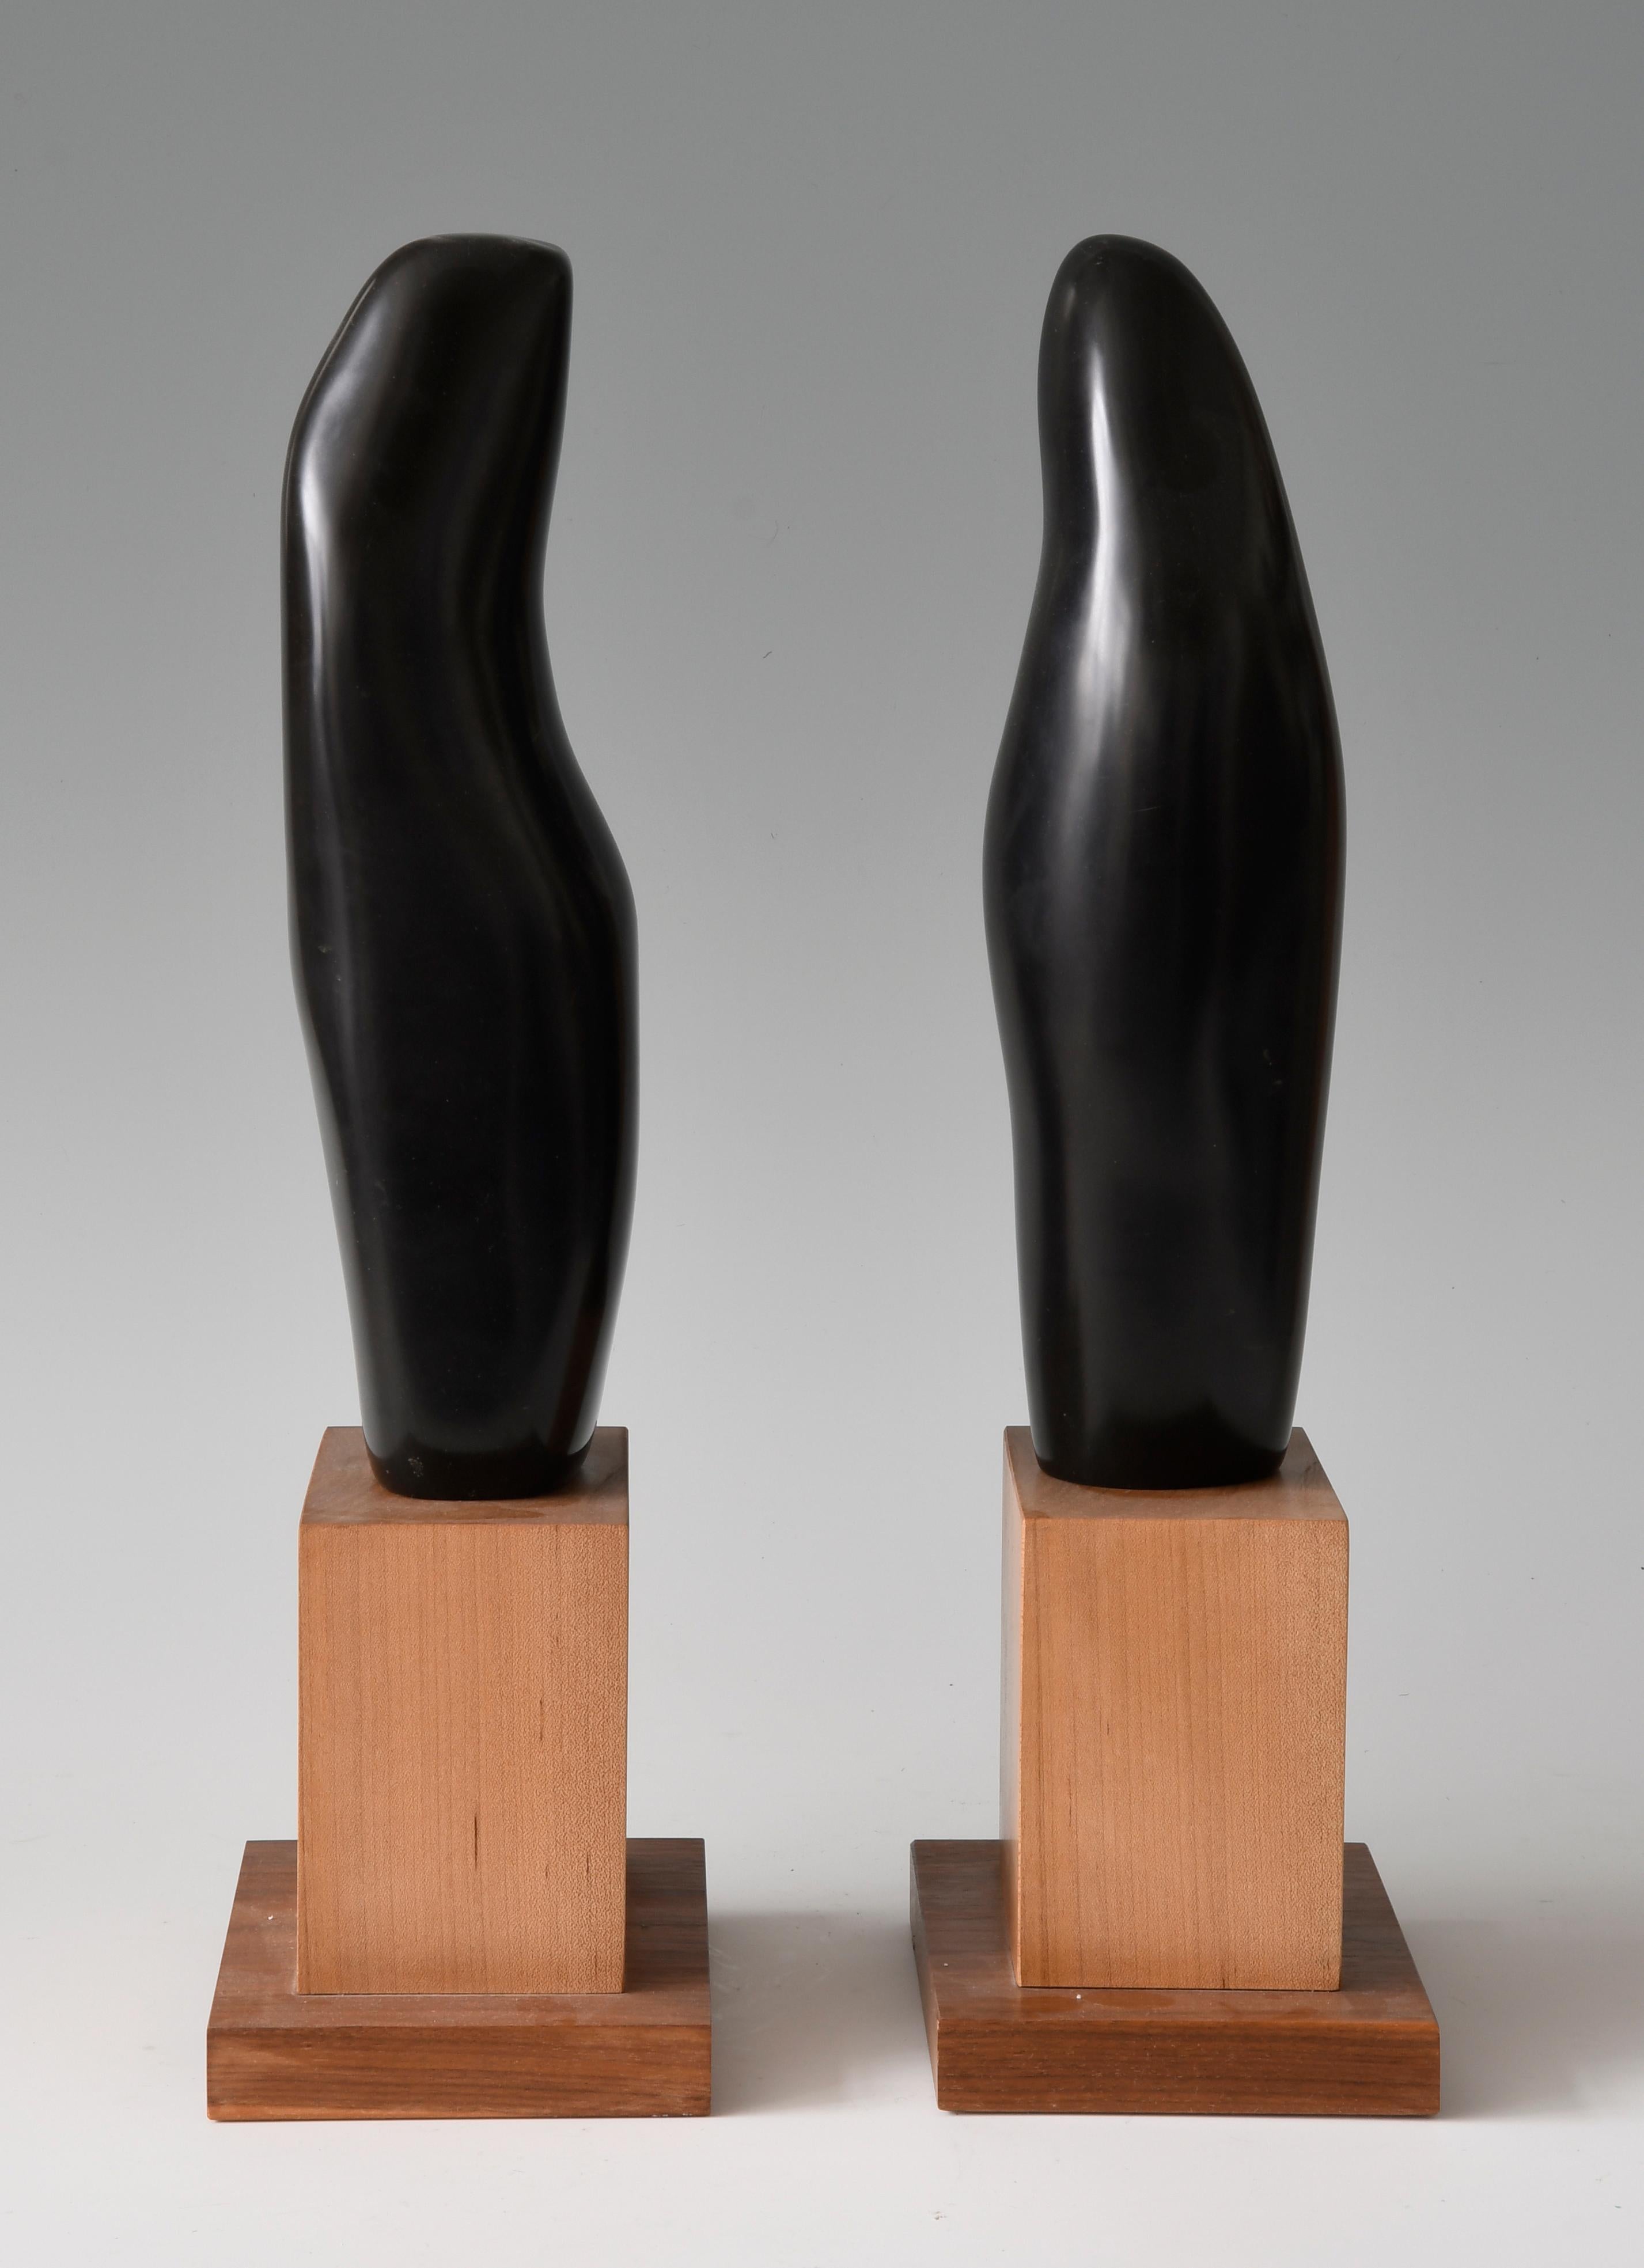 Lilian R Engel Abstract Sculpture - Sinuous Dance, sculpture of two abstracted figures, black marble with wood base